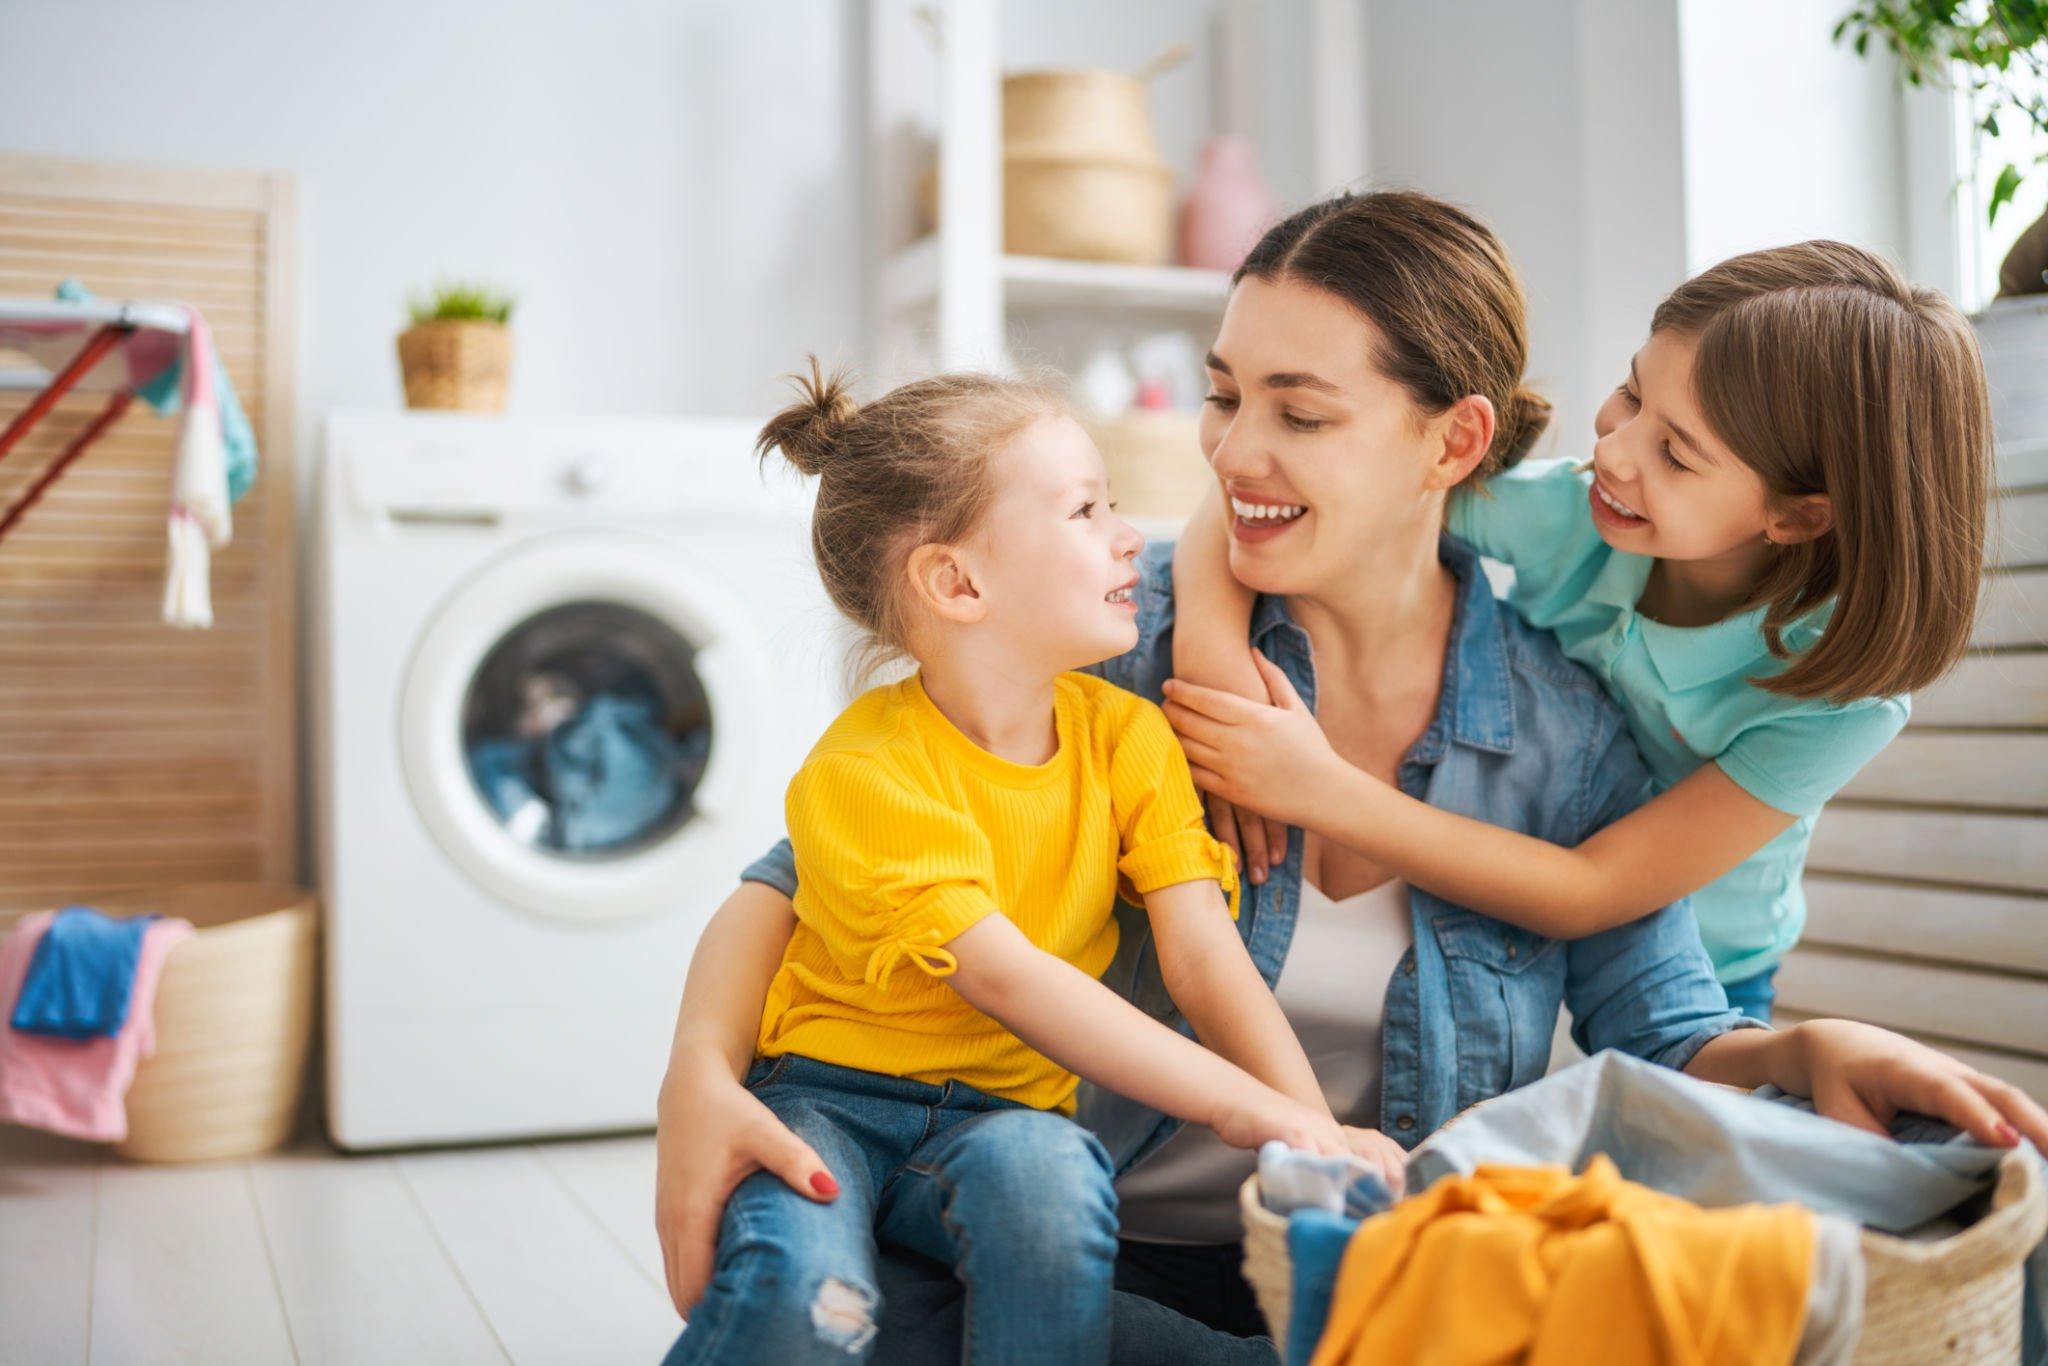 The Family Cleaning Routine: Turning Chores into Bonding Time